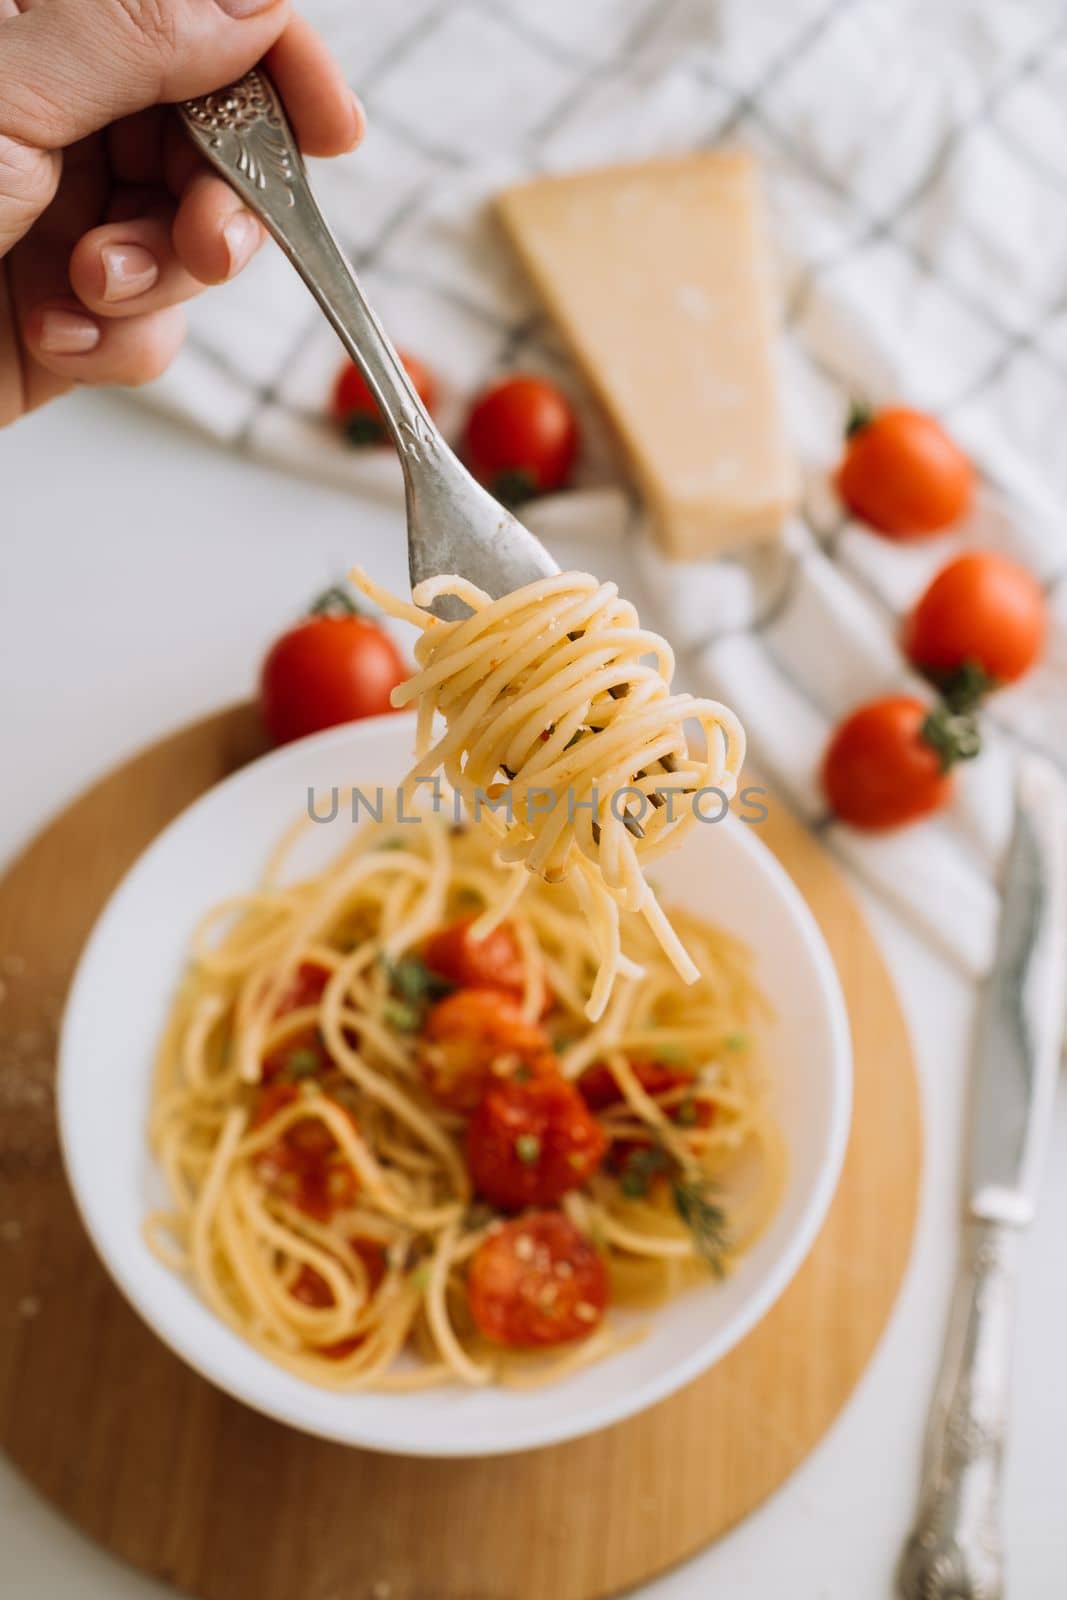 Spaghetti wrapped on fork in the background of a portion of pasta with cherry tomatoes in a plate and parmesan cheese